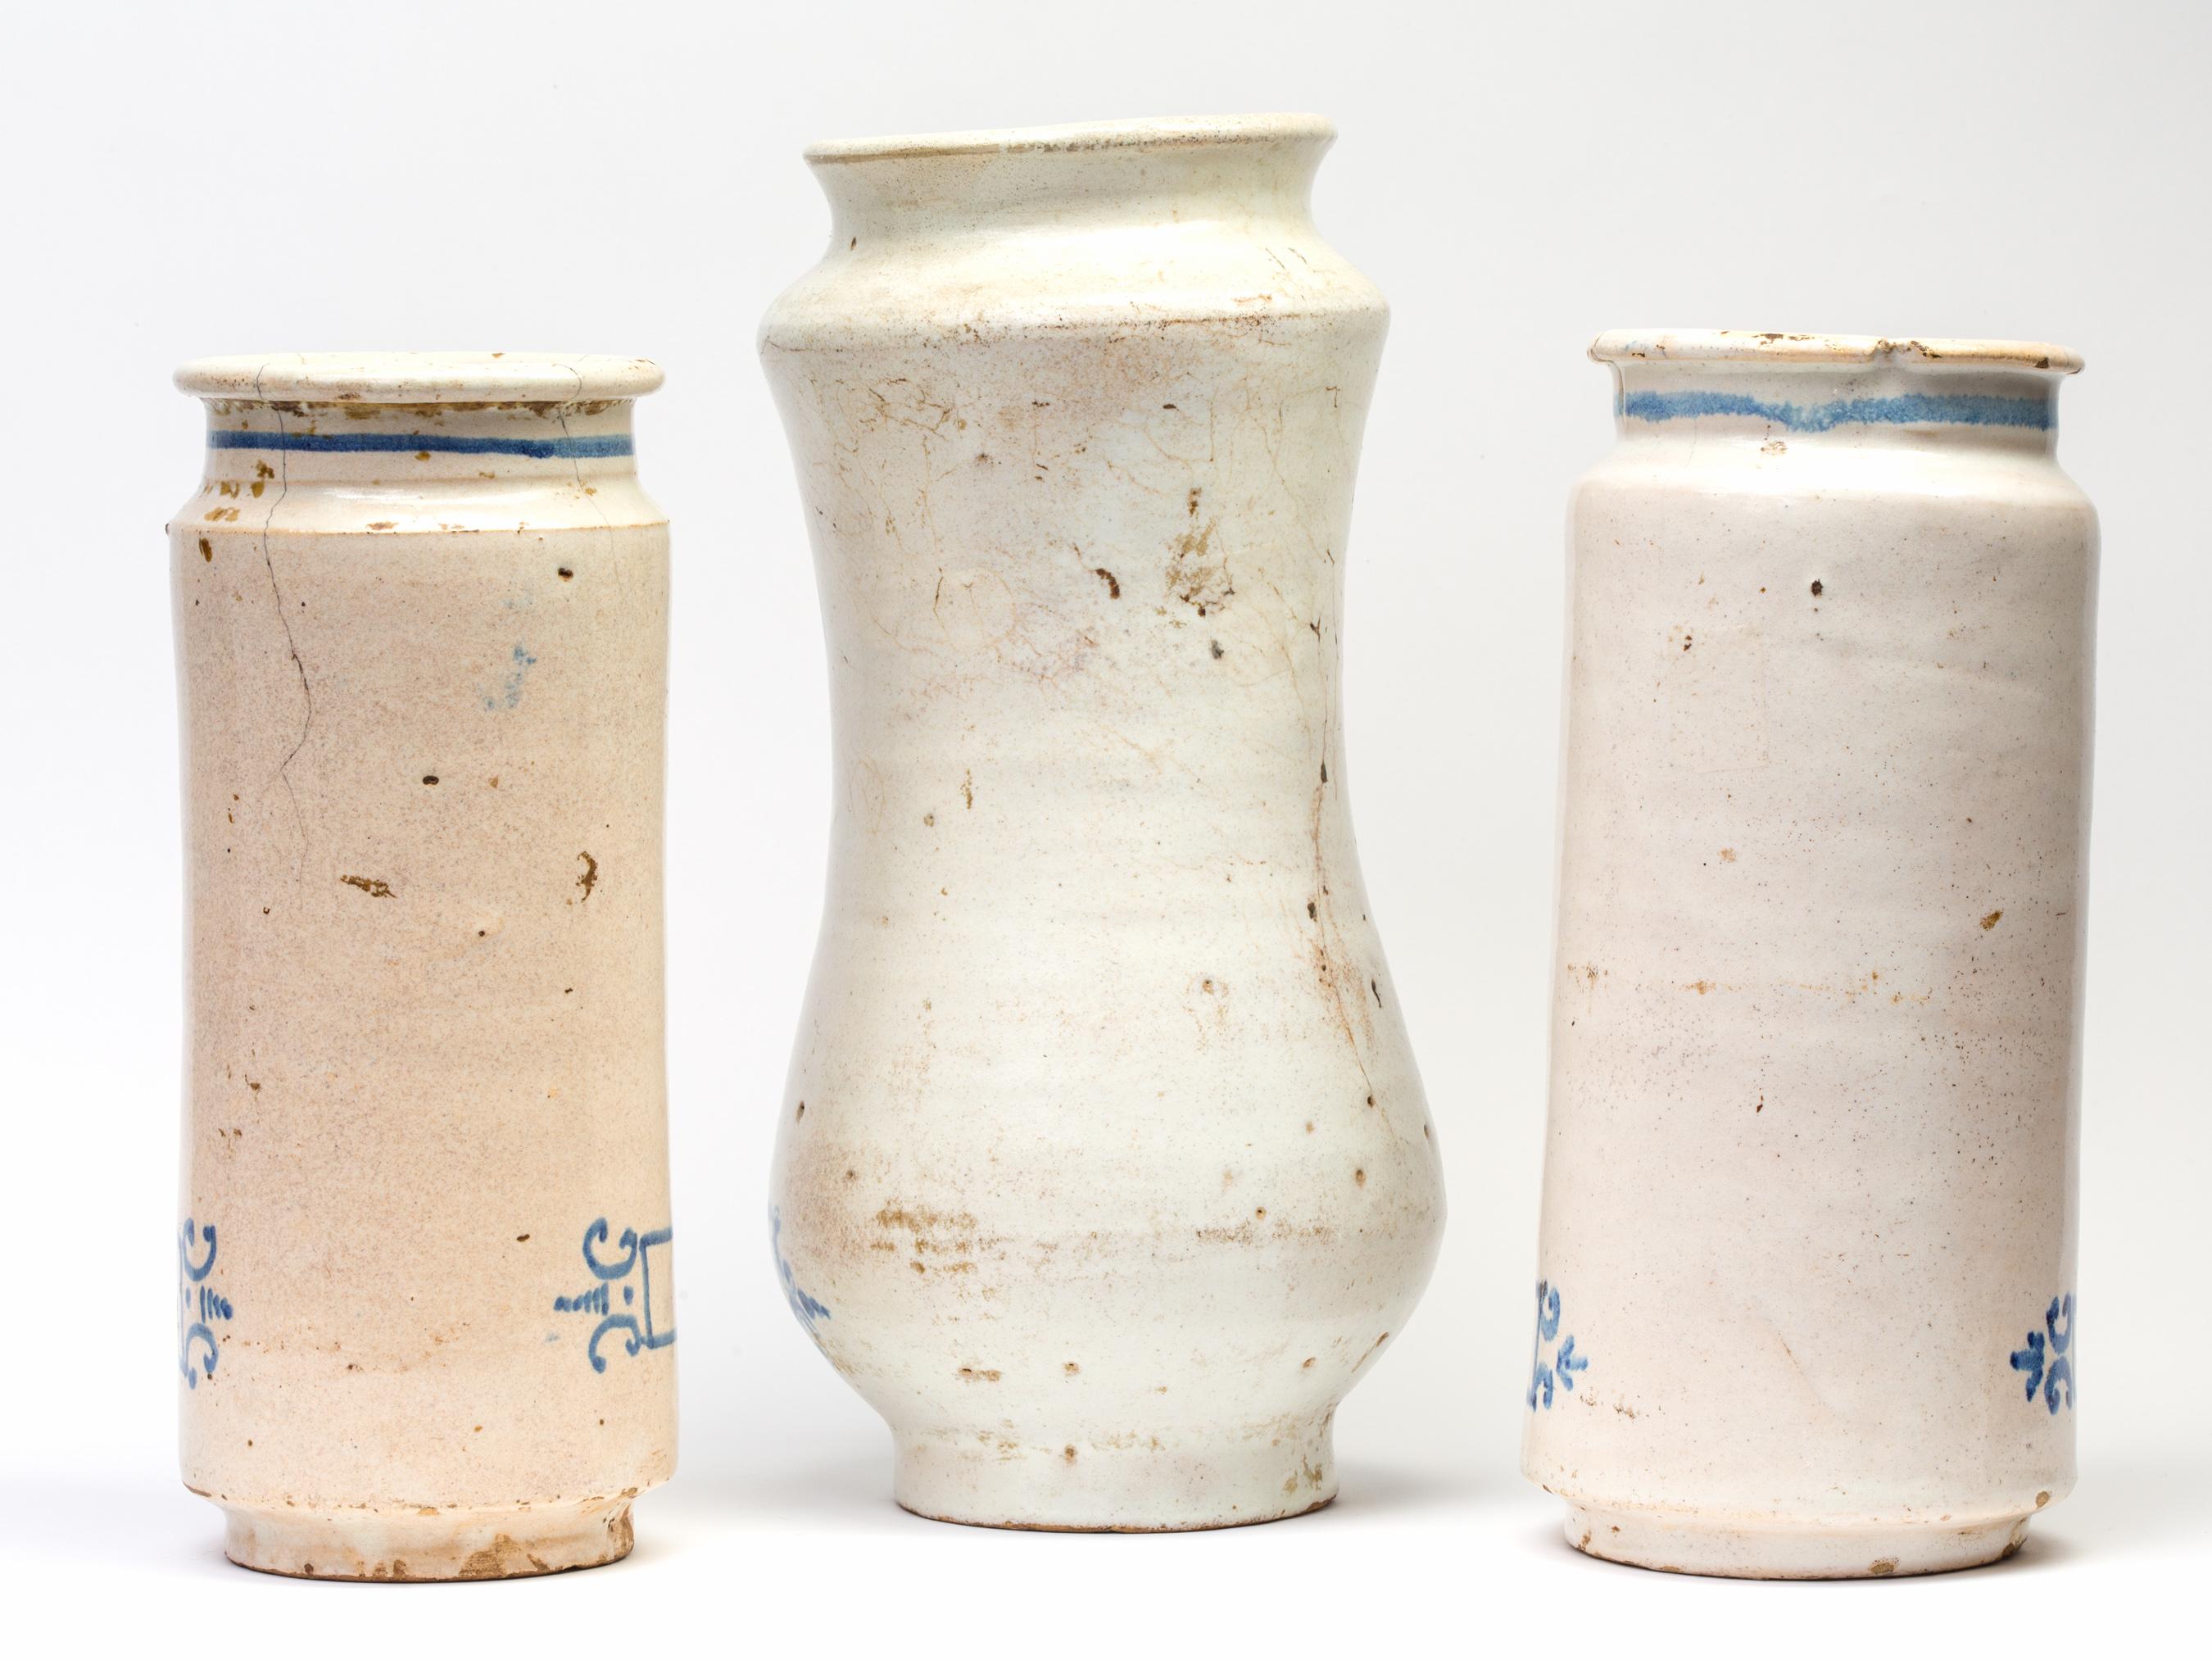 A set of three (3) 18th century glazed ceramic apothecary jars made in Talavera de la Reina, Spain - known for its ceramic tradition since the Roman times. Also called 